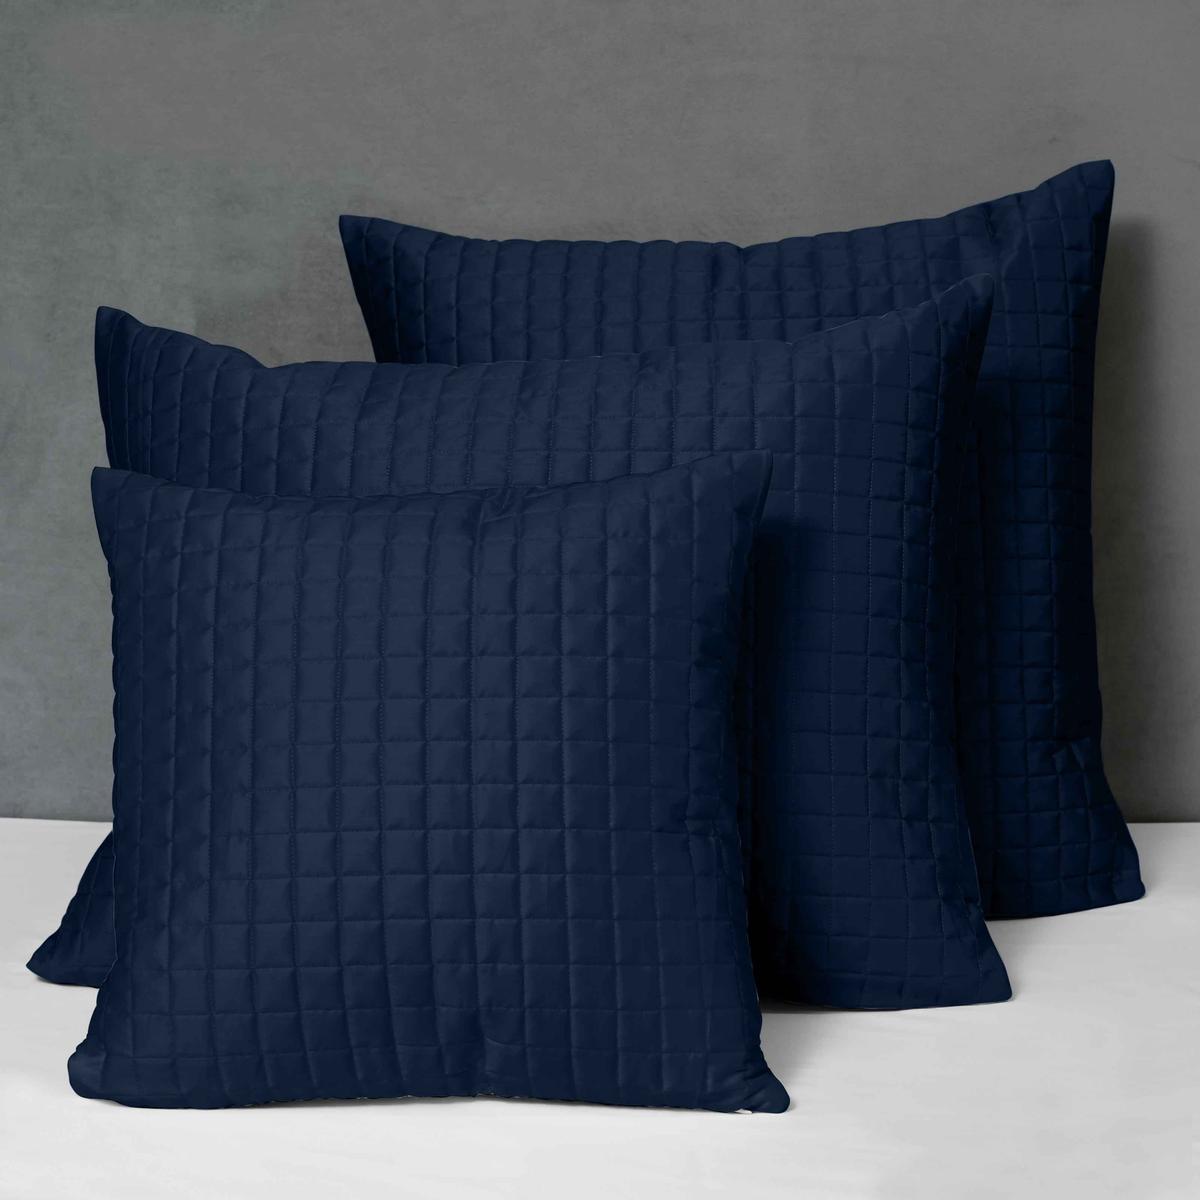 Different Sizes of Quilted Shams of Signoria Masaccio Bedding in Dark Blue Color